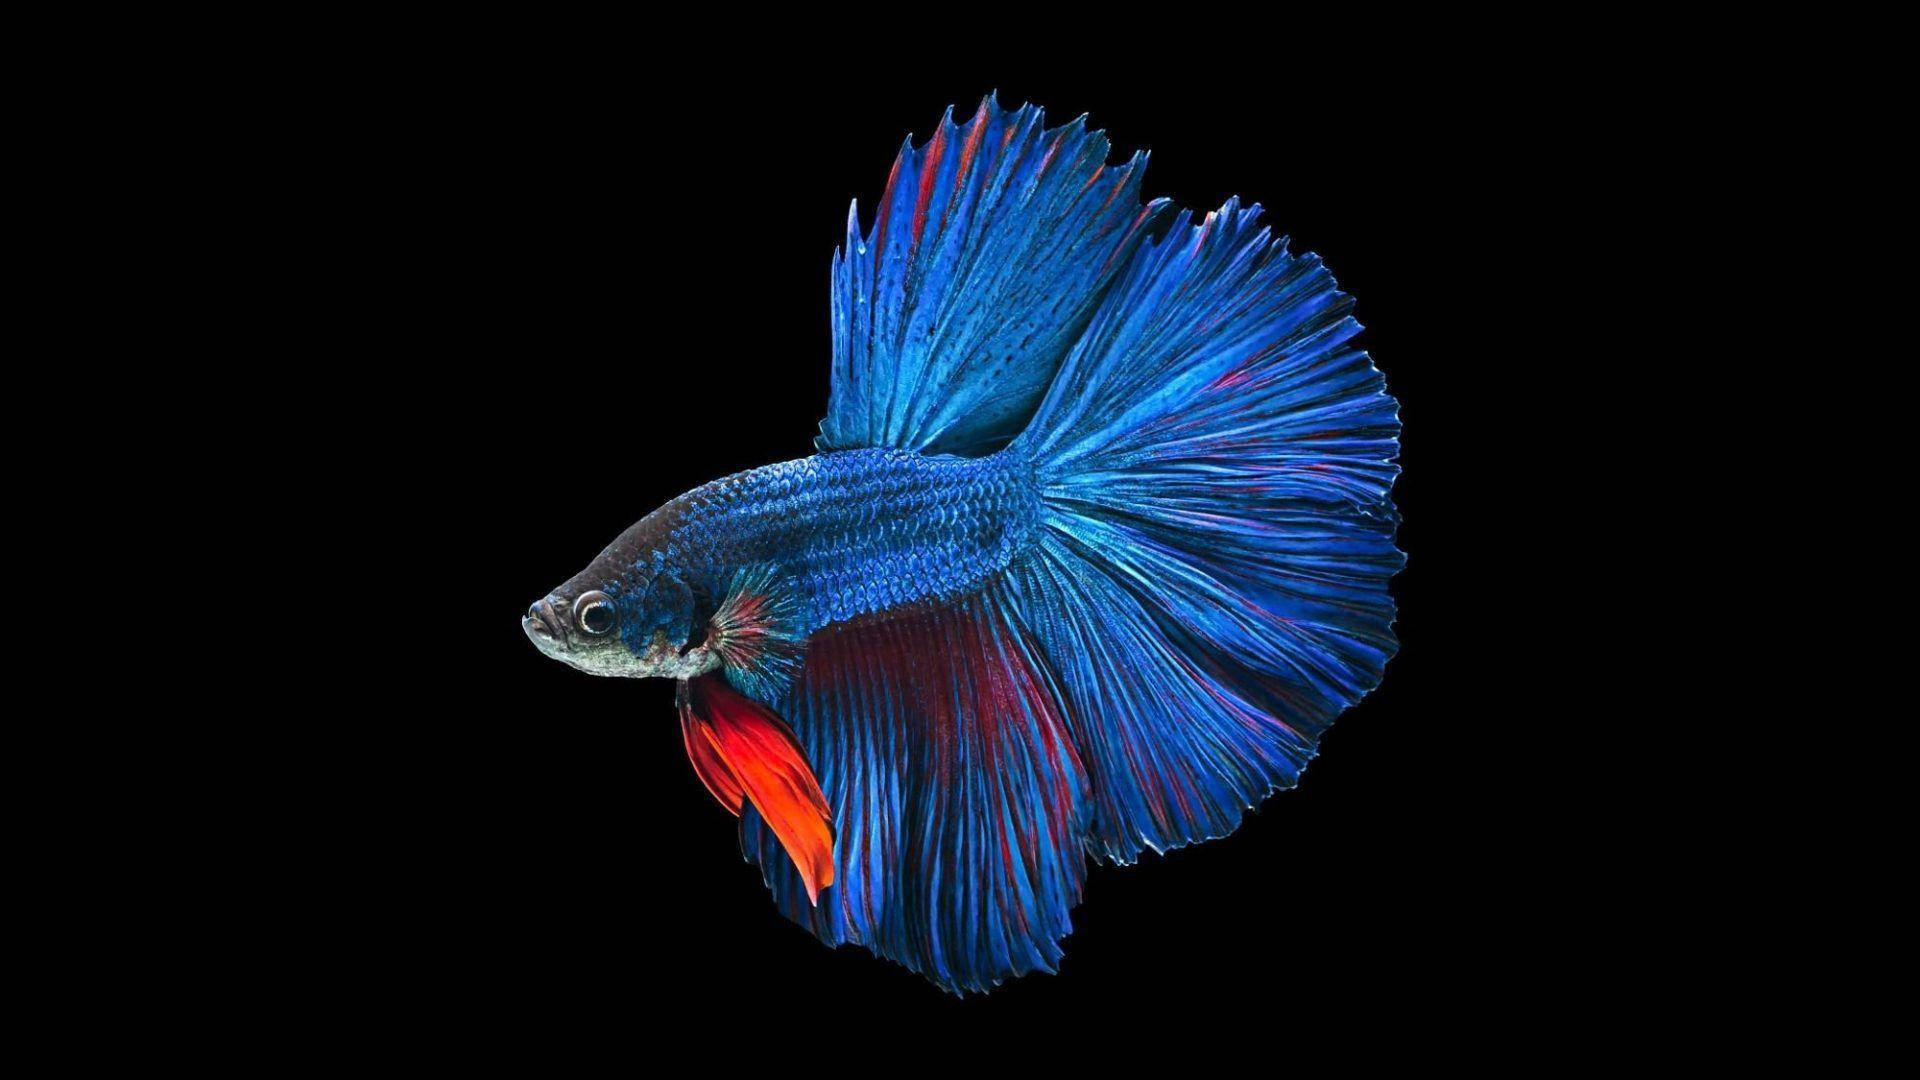 Free Fish Wallpaper Downloads, [900+] Fish Wallpapers for FREE | Wallpapers .com